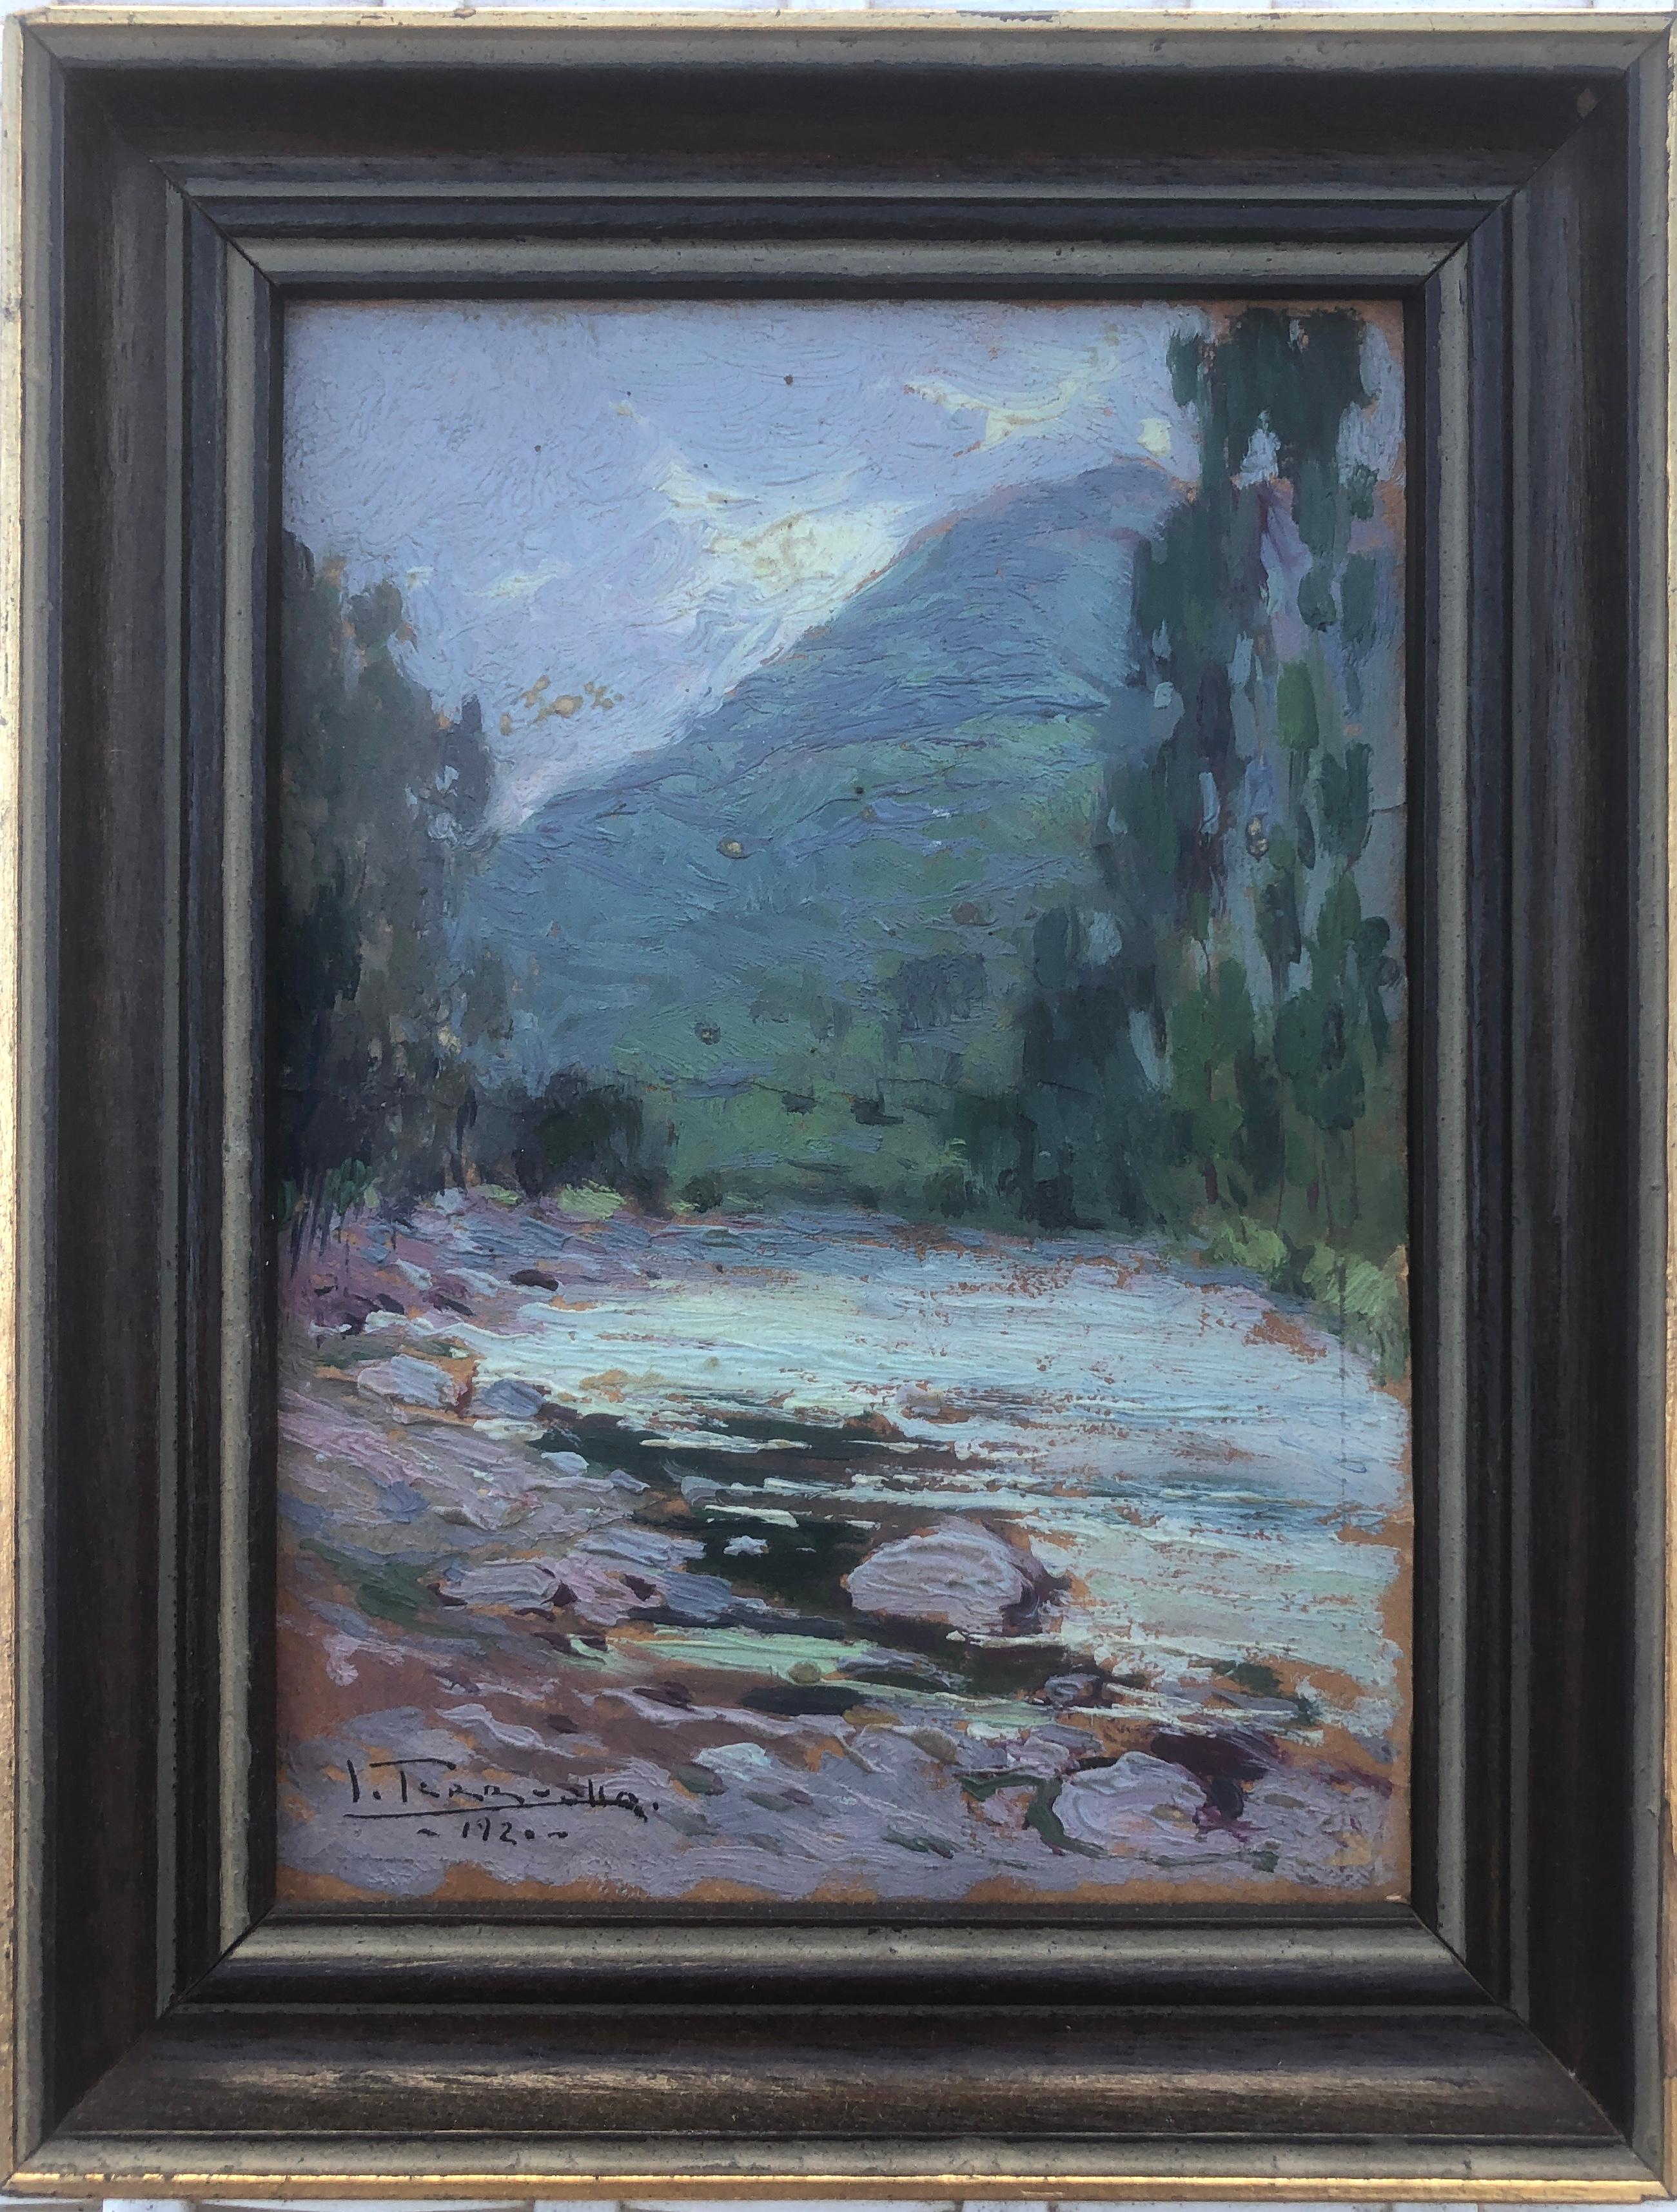 Landscape with river oil on cardboard painting impressionism Spain - Painting by Joaquin Terruella Matilla